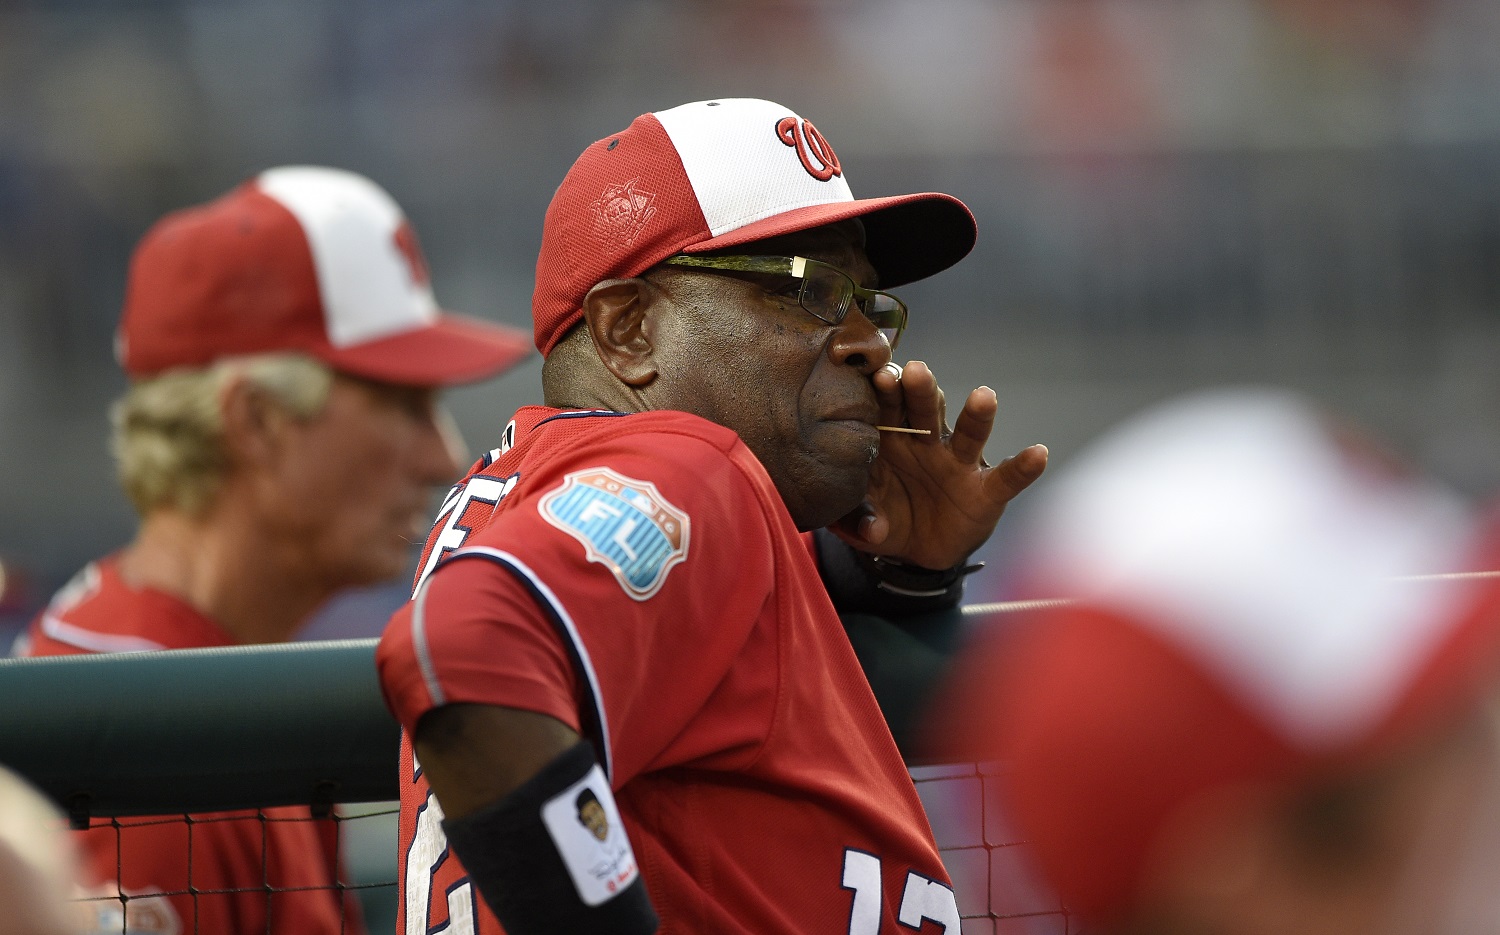 Washington Nationals manager Dusty Baker looks on during the fourth inning of an interleague exhibition baseball game against the Minnesota Twins, Friday, April 1, 2016, in Washington. The Nationals won 4-3. (AP Photo/Nick Wass)